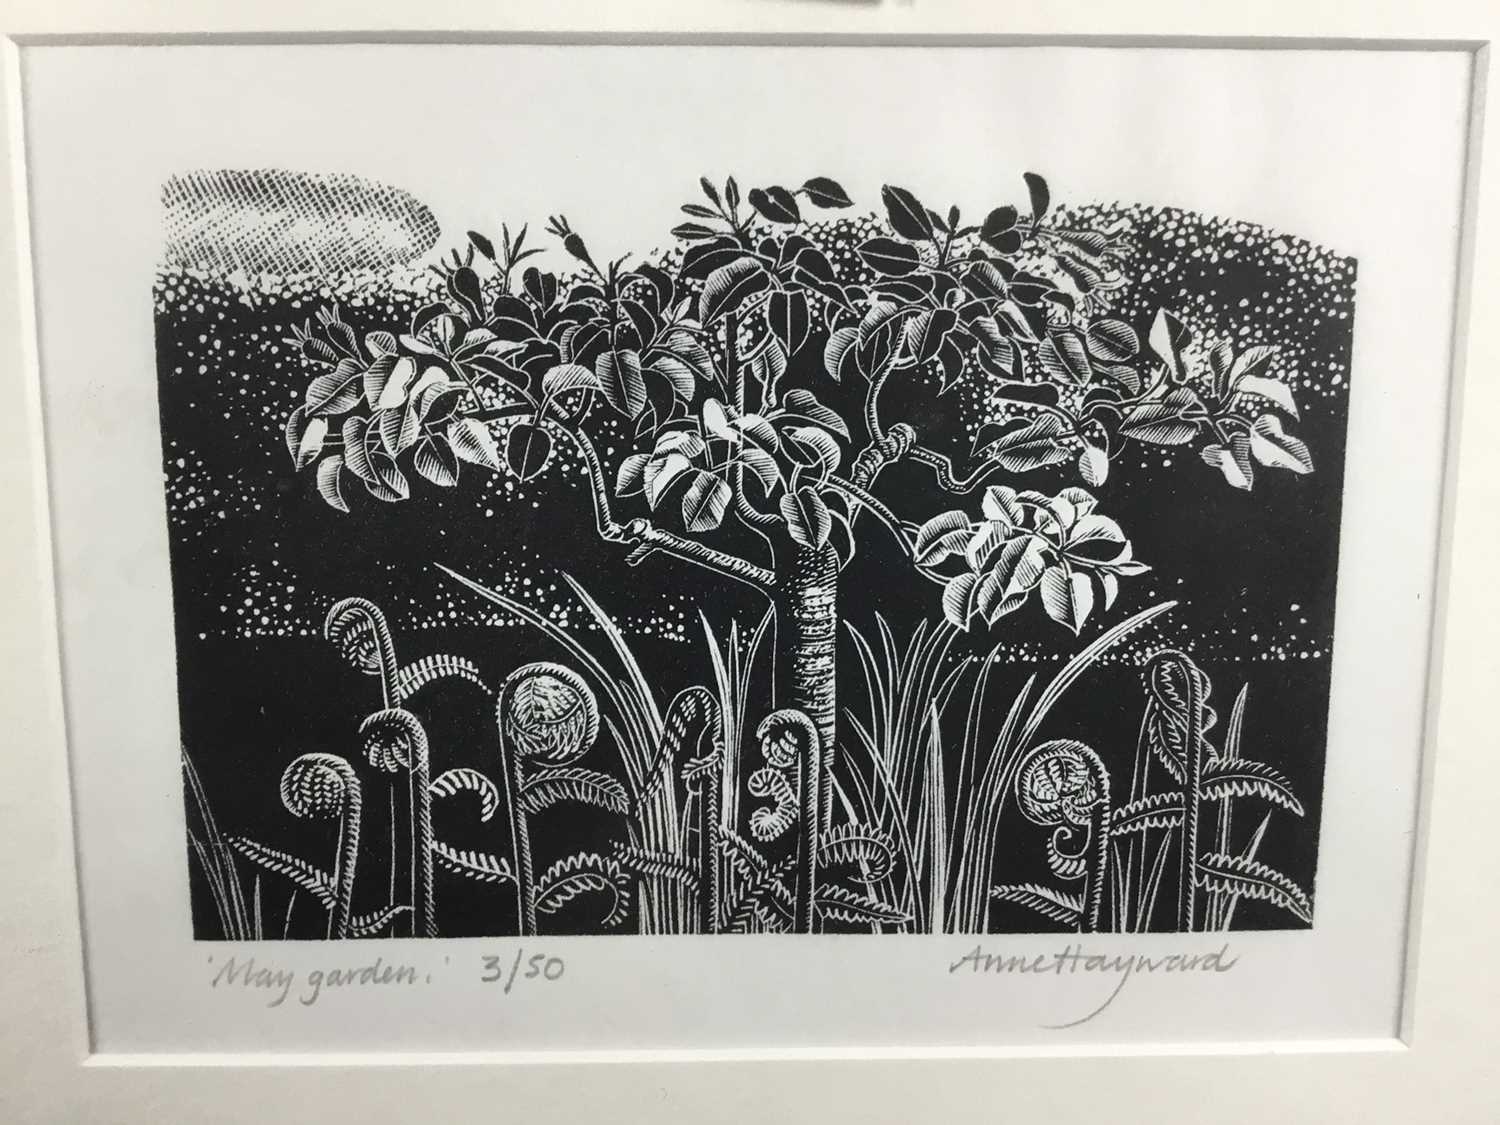 Anne Hayward, contemporary, pair of signed limited edition woodcut engravings, “A Year In The Garden - Image 2 of 5